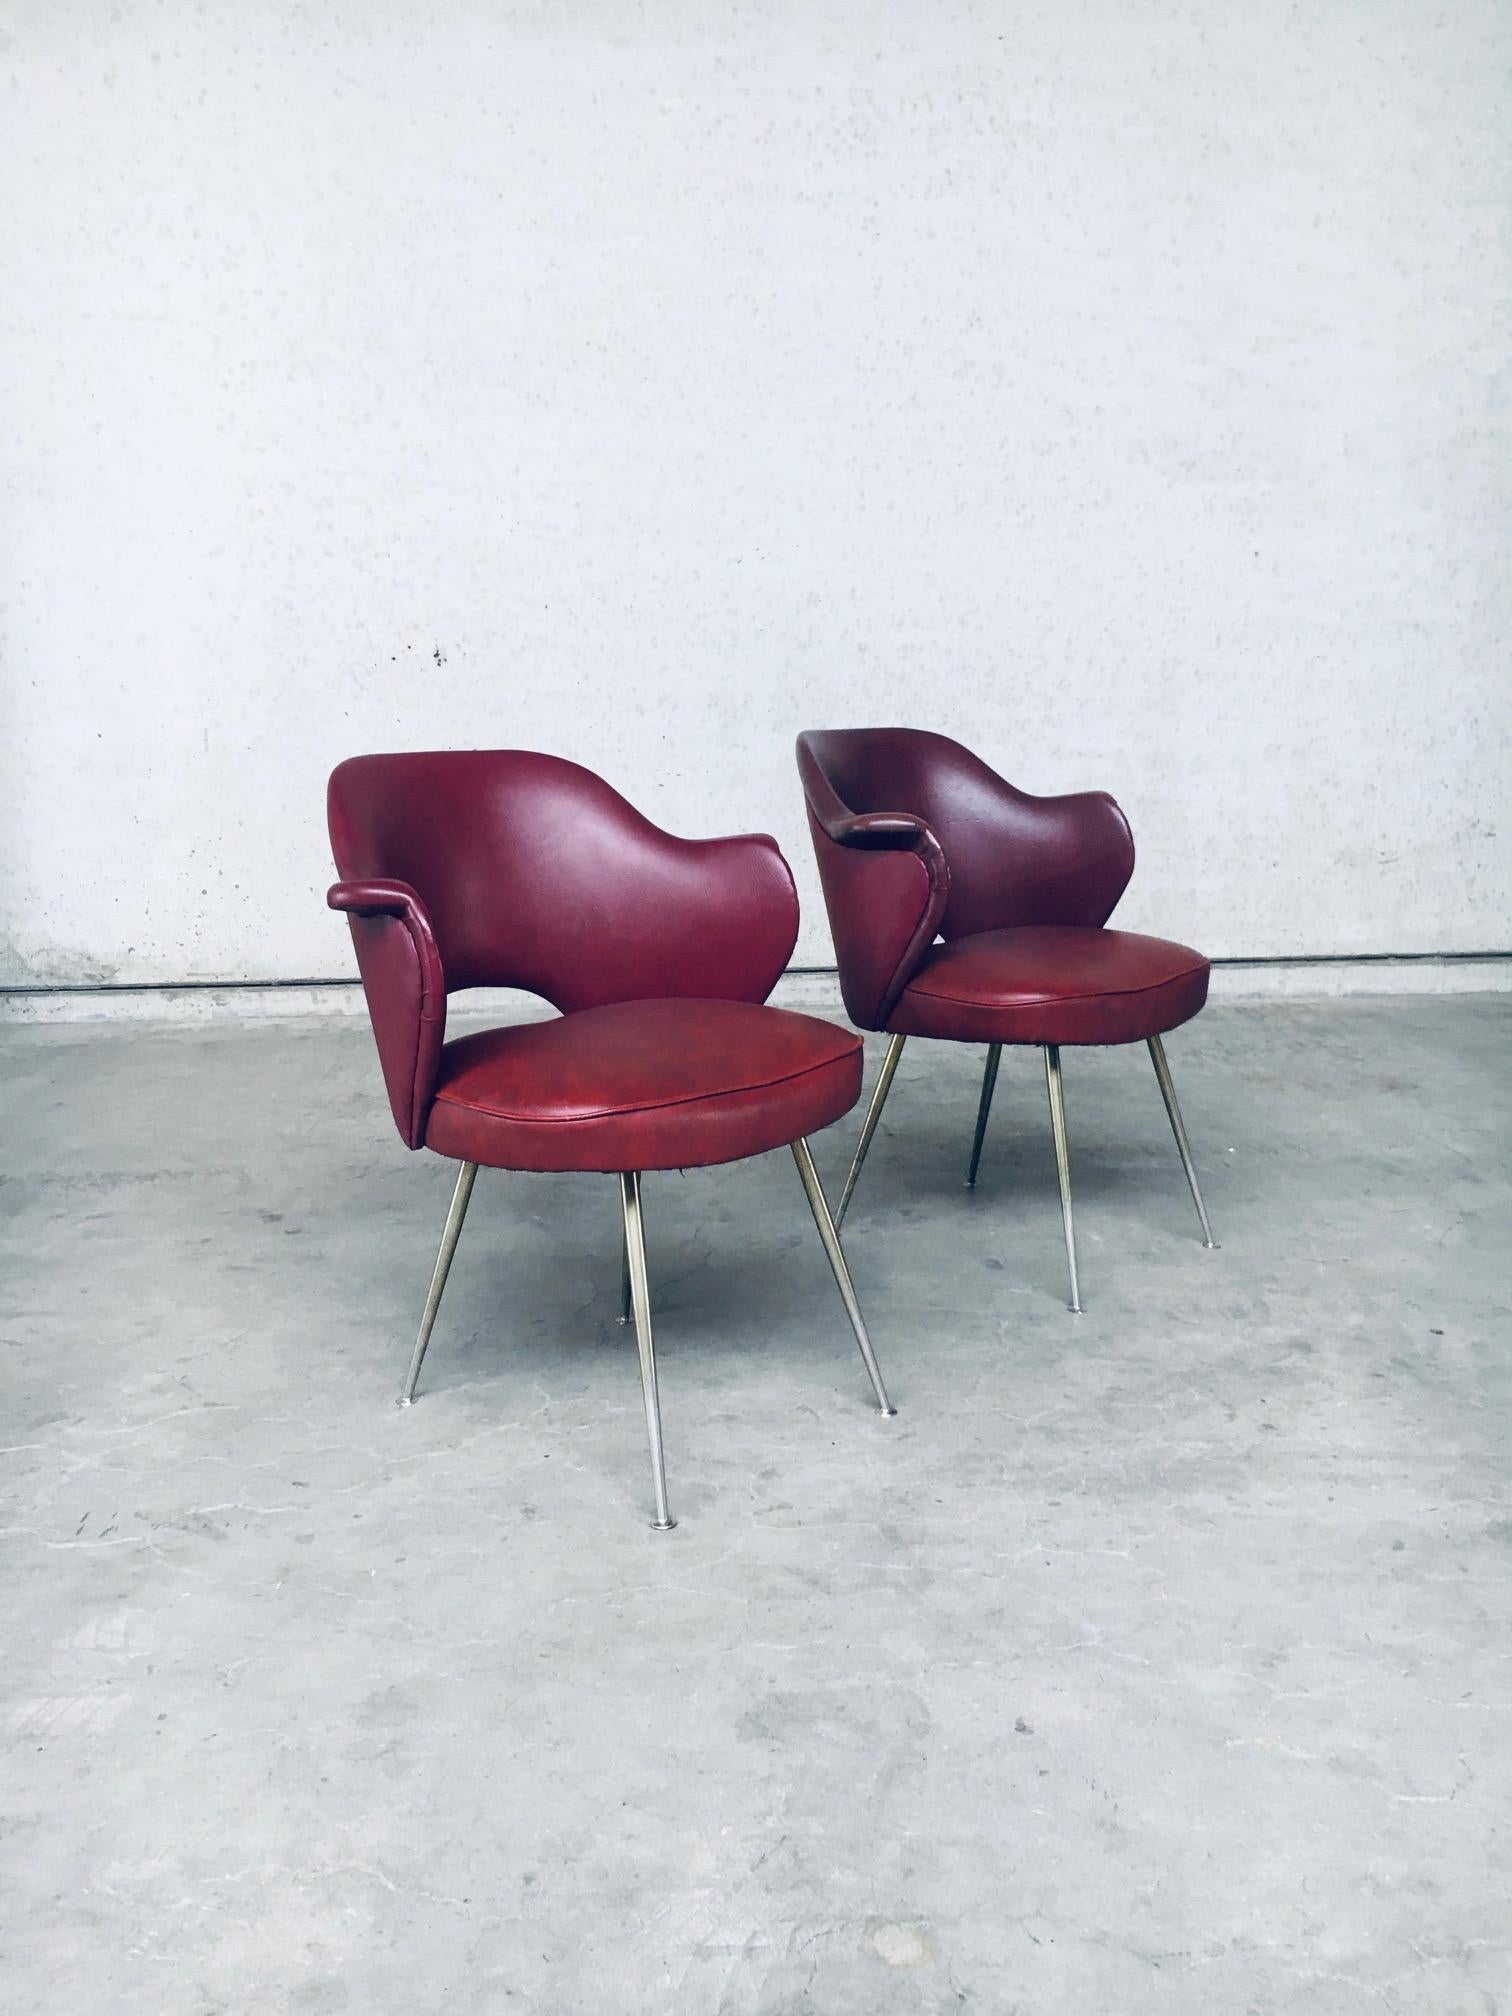 Vintage Mid-Century Modern Italian Design Skai leather office armchair set of 2. Made in Italy, 1950s. Bordeaux skai faux leather formed seat on brass covered metal legs. Beautifully shaped seat with small armrests in all original bordeaux red skai